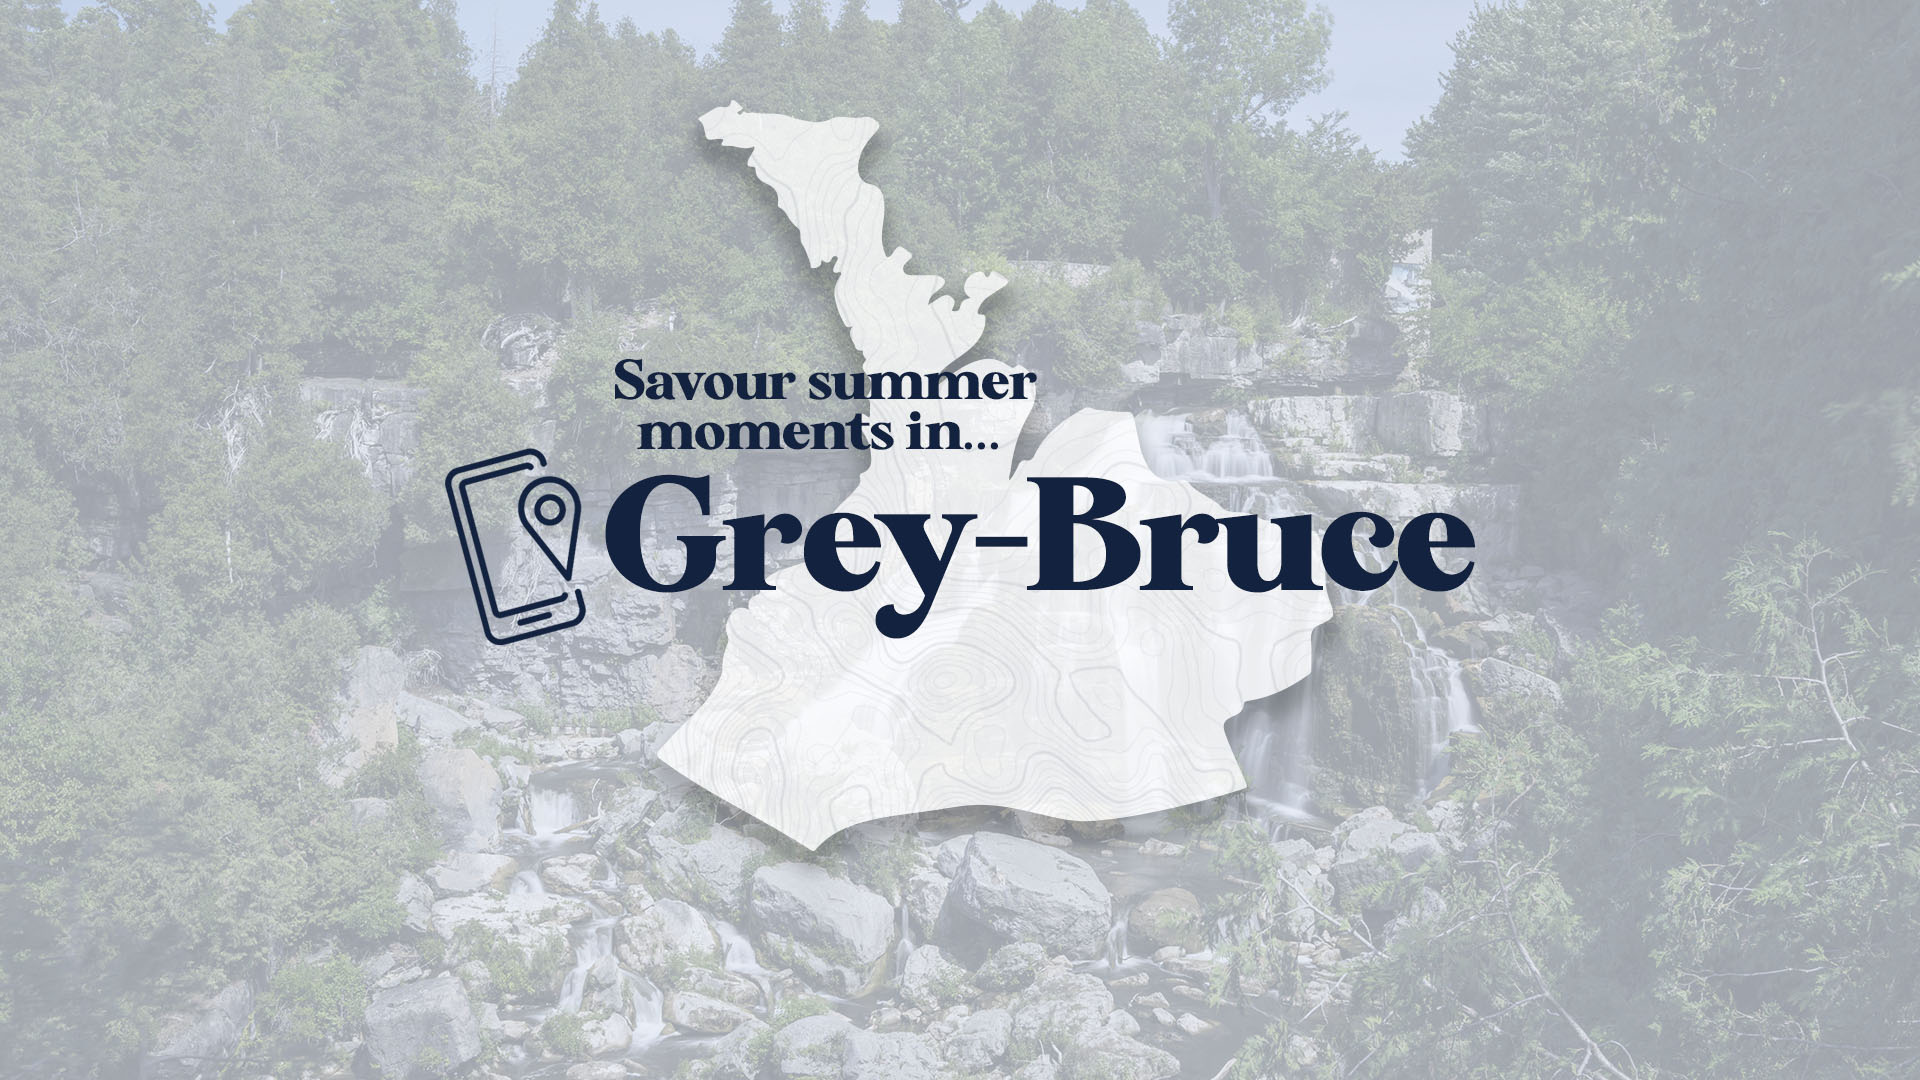 Savour Summer moments in Grey-Bruce logo over top of an image of a waterfall.